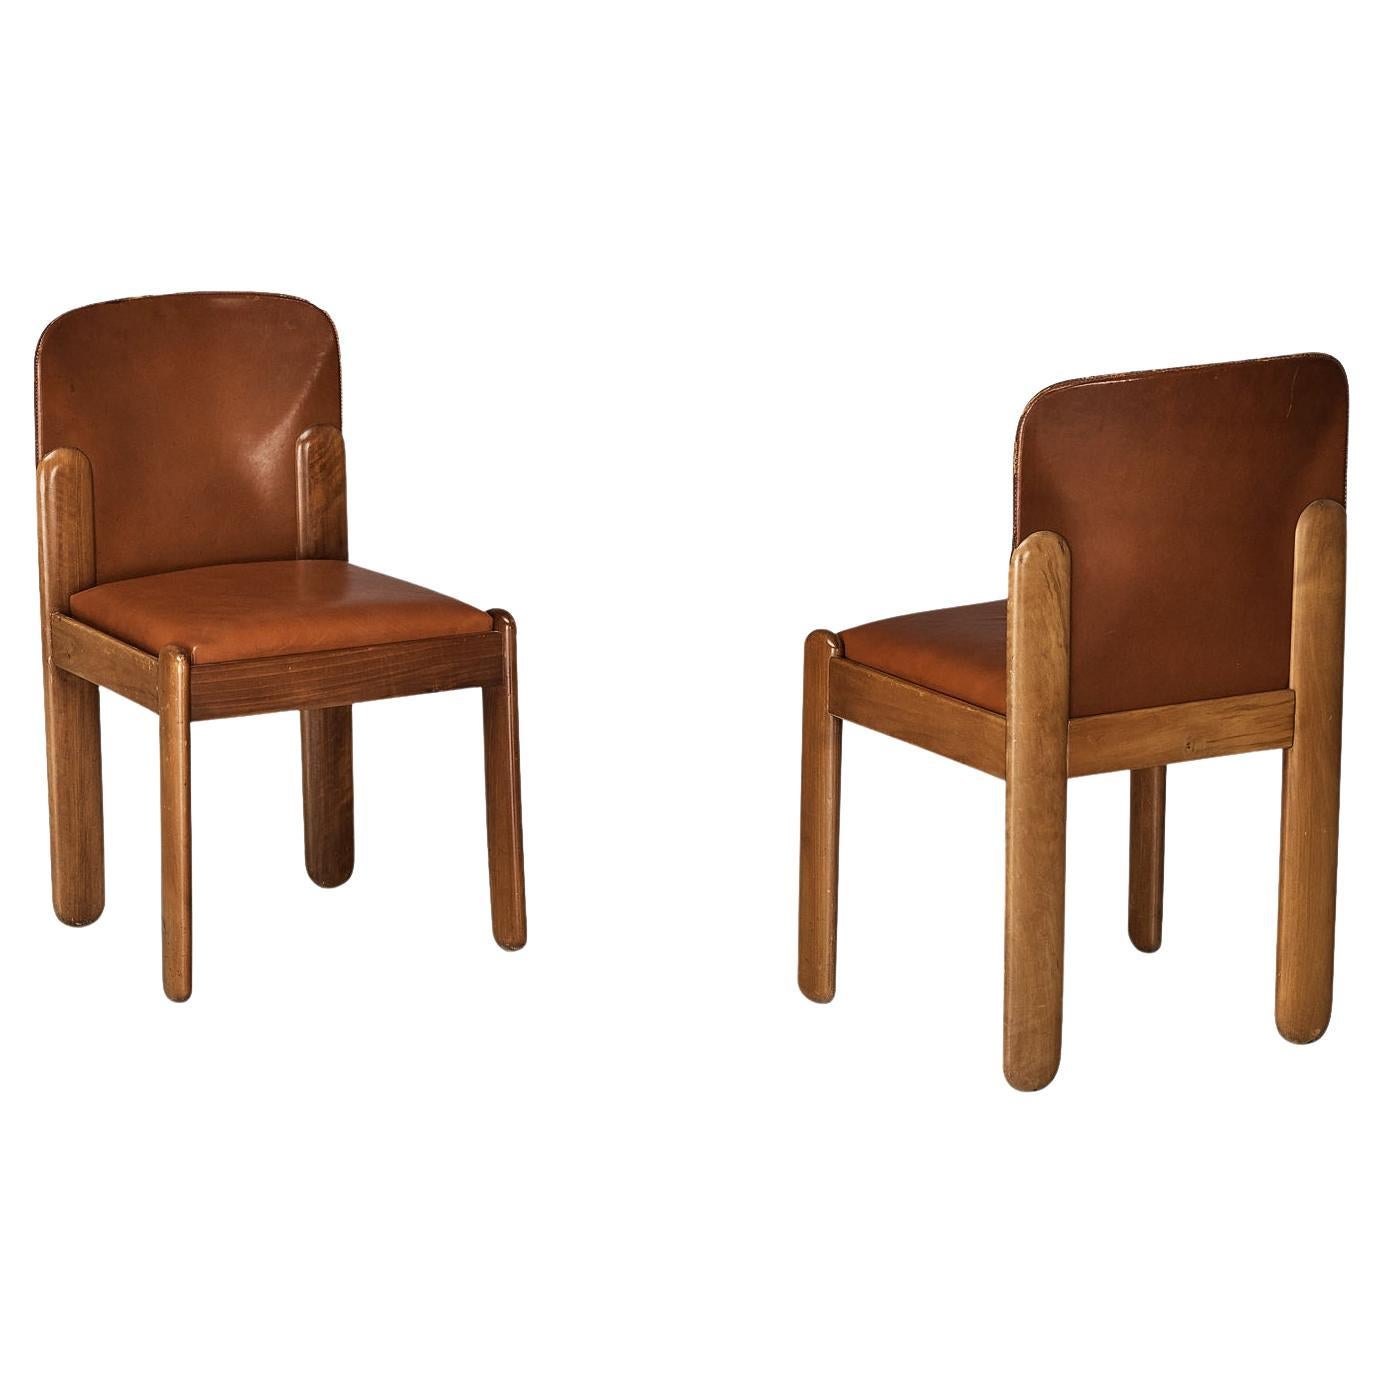 Silvio Coppola for Bernini Pair of Dining Chairs in Brown Leather & Walnut 